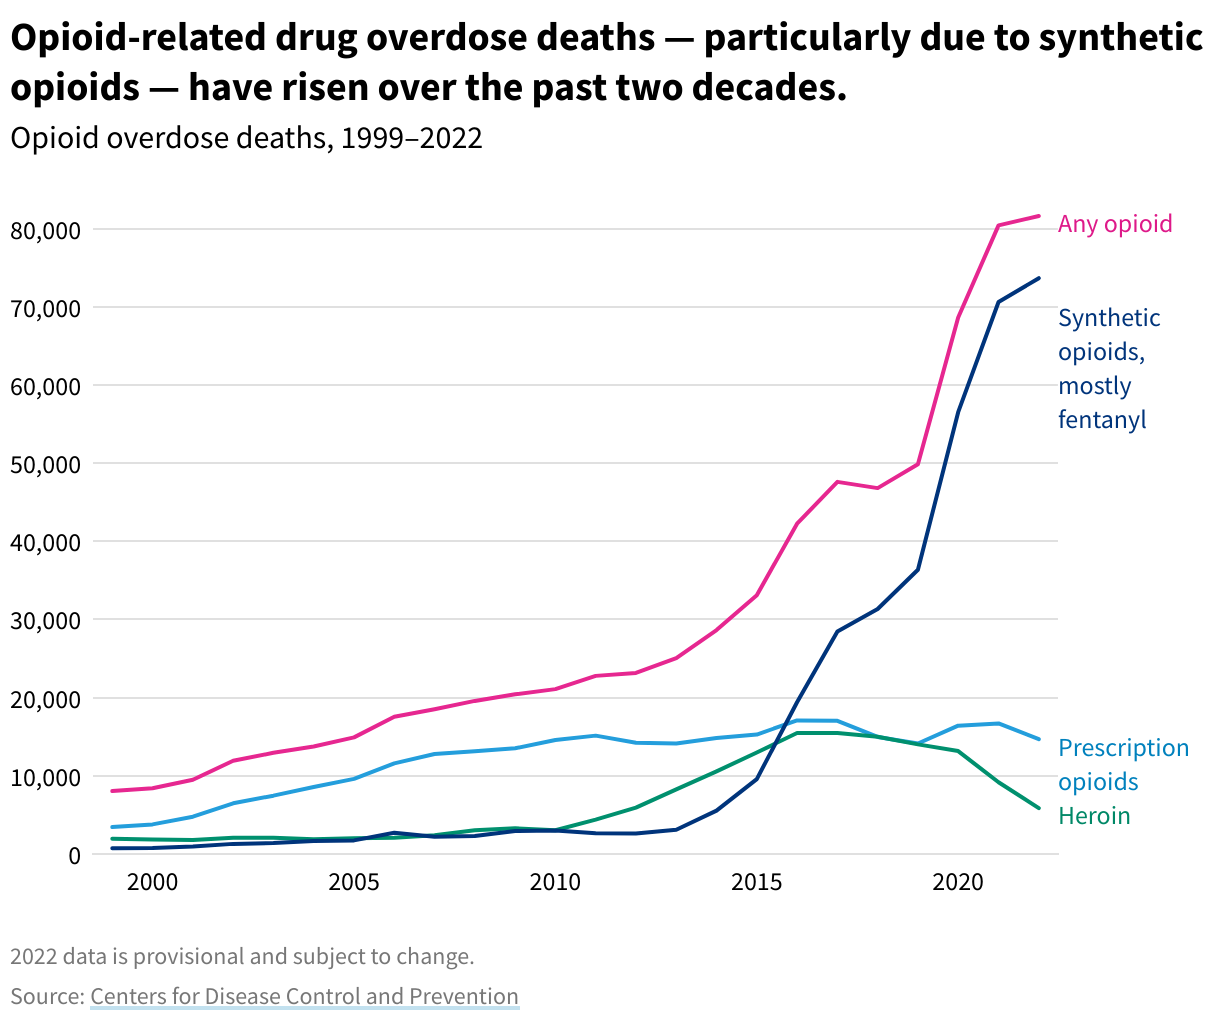 Line chart showing deaths from fentanyl, prescription opioids, and heroin from 1999 to 2022. Fentanyl deaths have risen, while prescription opioids and heroin have fallen in recent years.